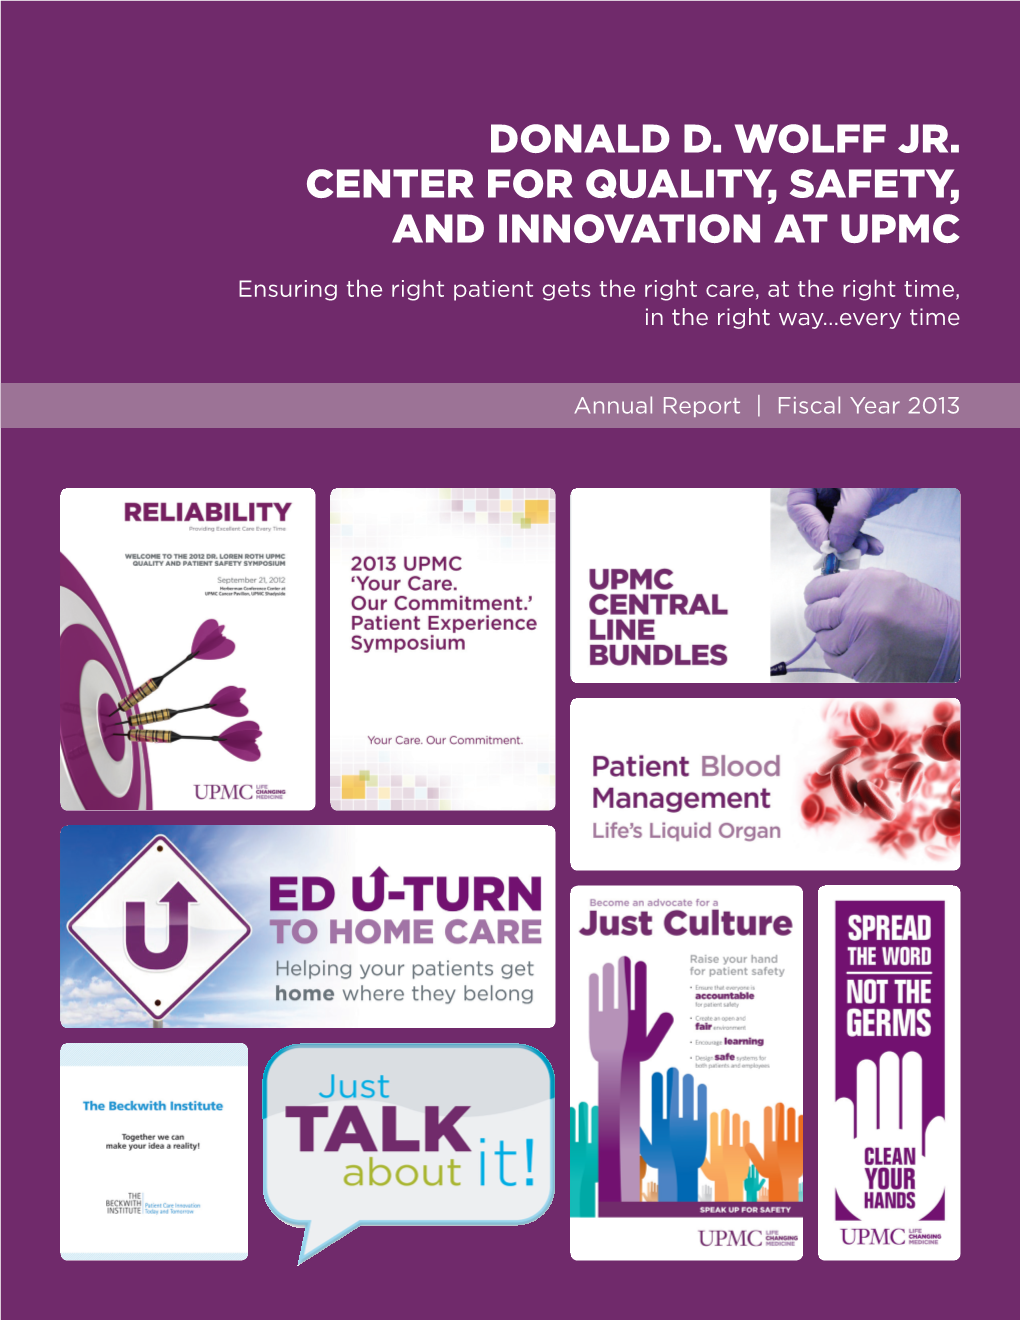 Donald D. Wolff Jr. Center for Quality, Safety, and Innovation at Upmc